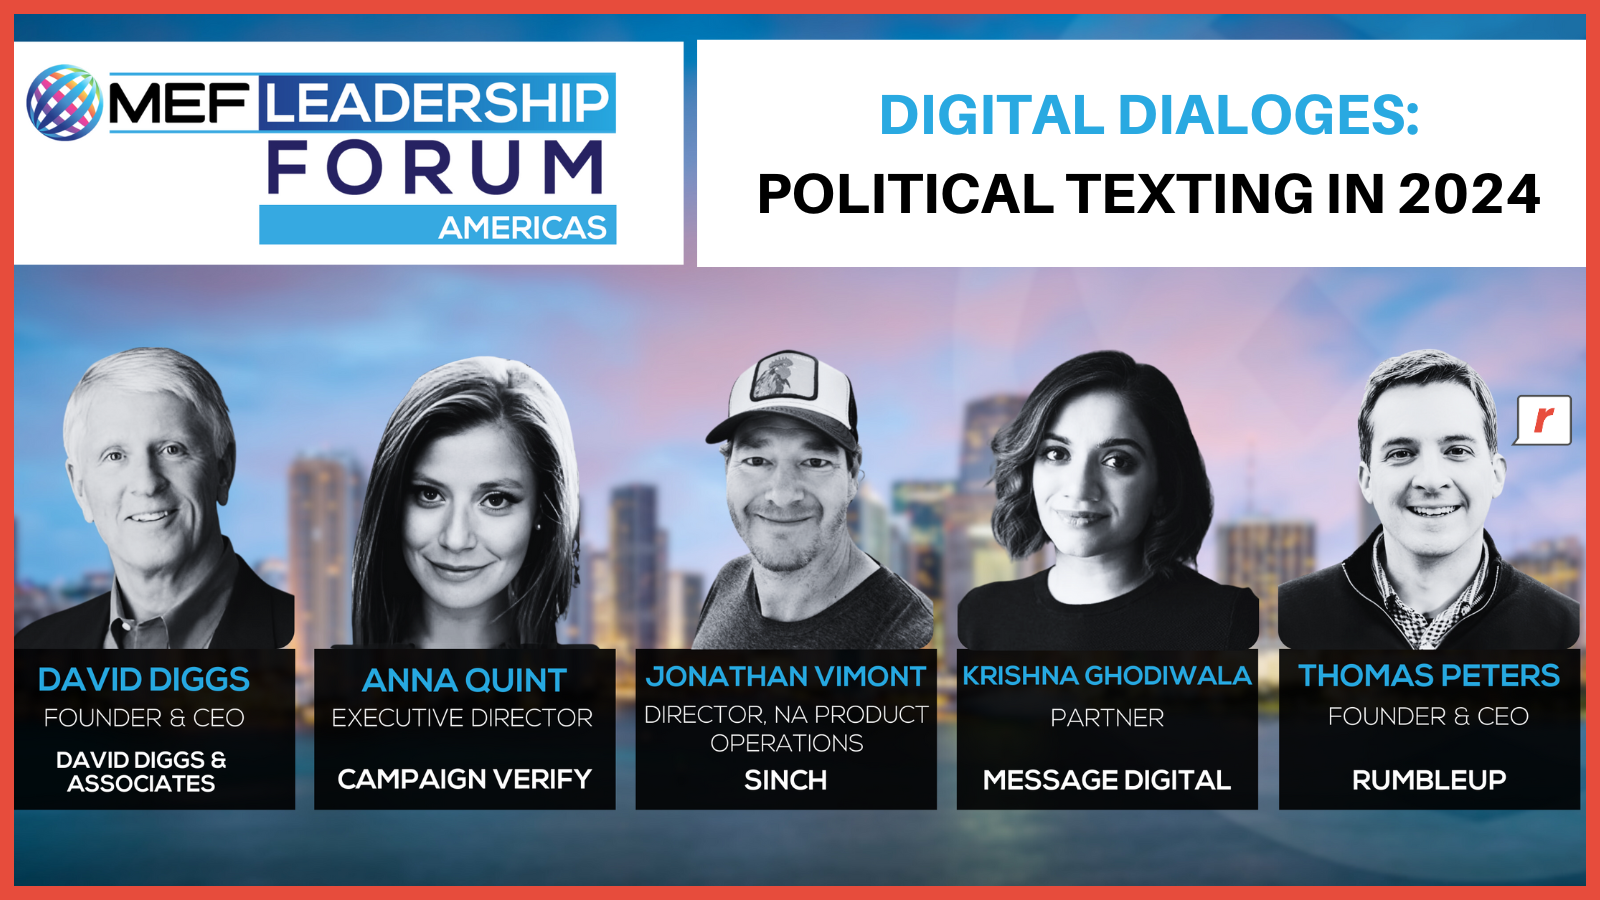 Digital Dialogues: Political Texting in 2024